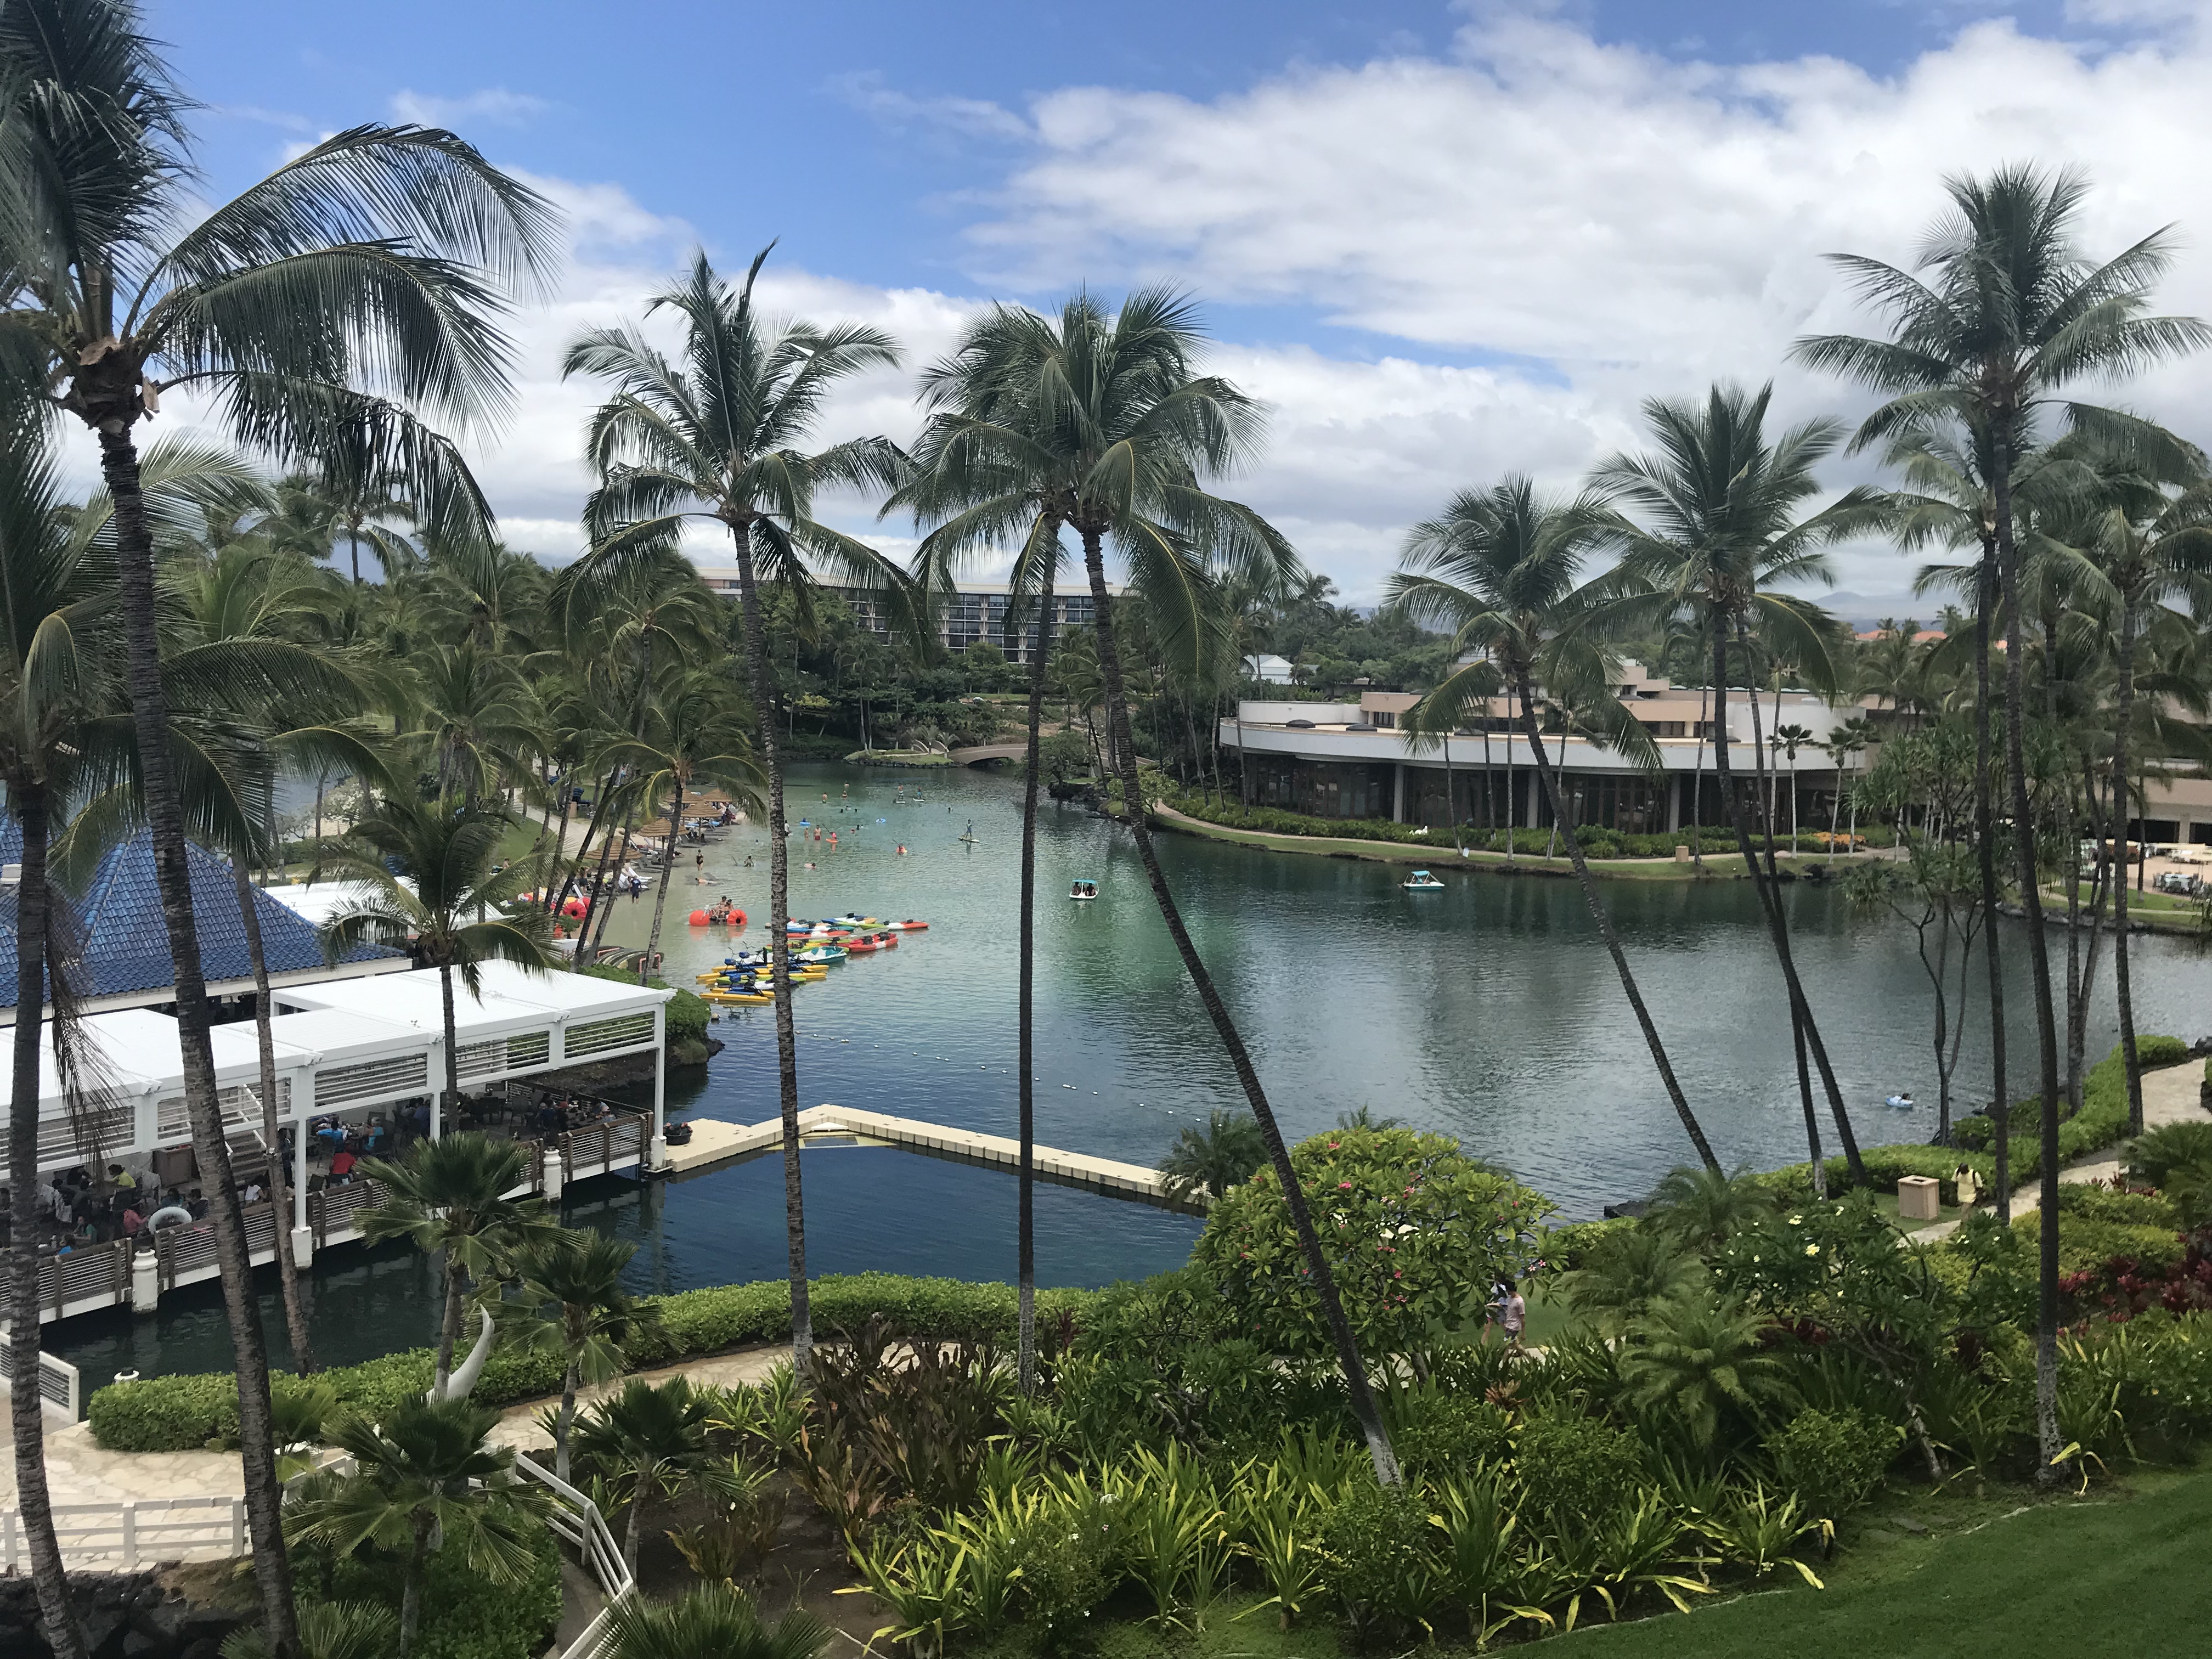 Review: Another Fun Stay at the Hilton Hawaiian Village - TravelUpdate